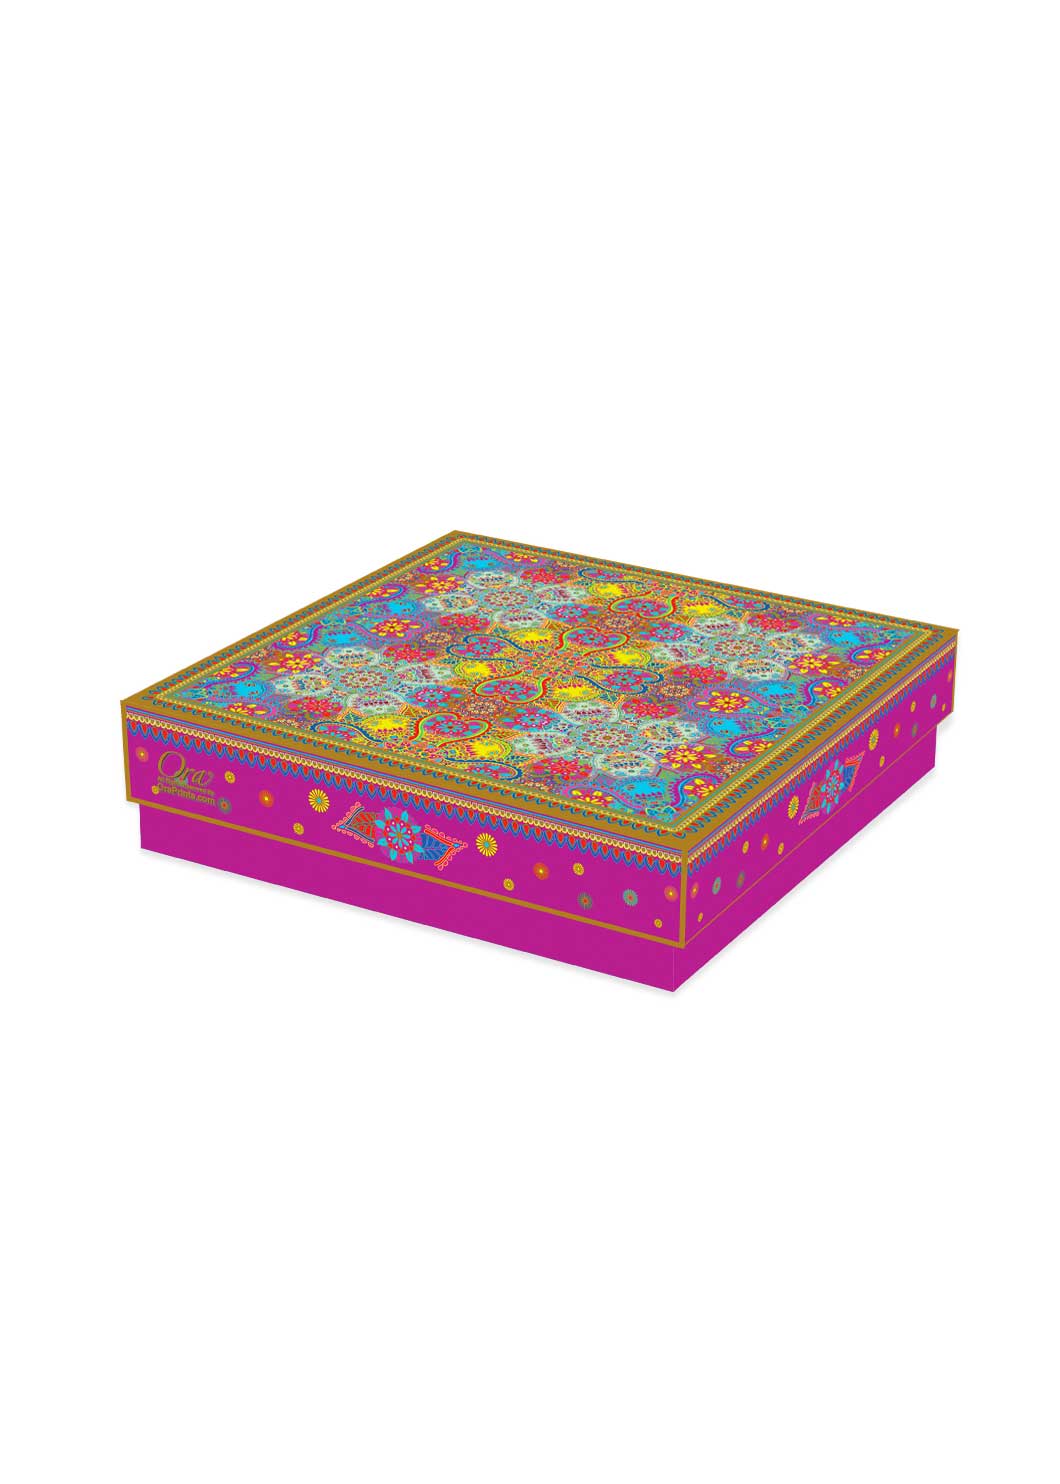 Multi Pattern Ornamental Floral Design Box for Packing - Cloth Packaging Box - Square Yellow Box